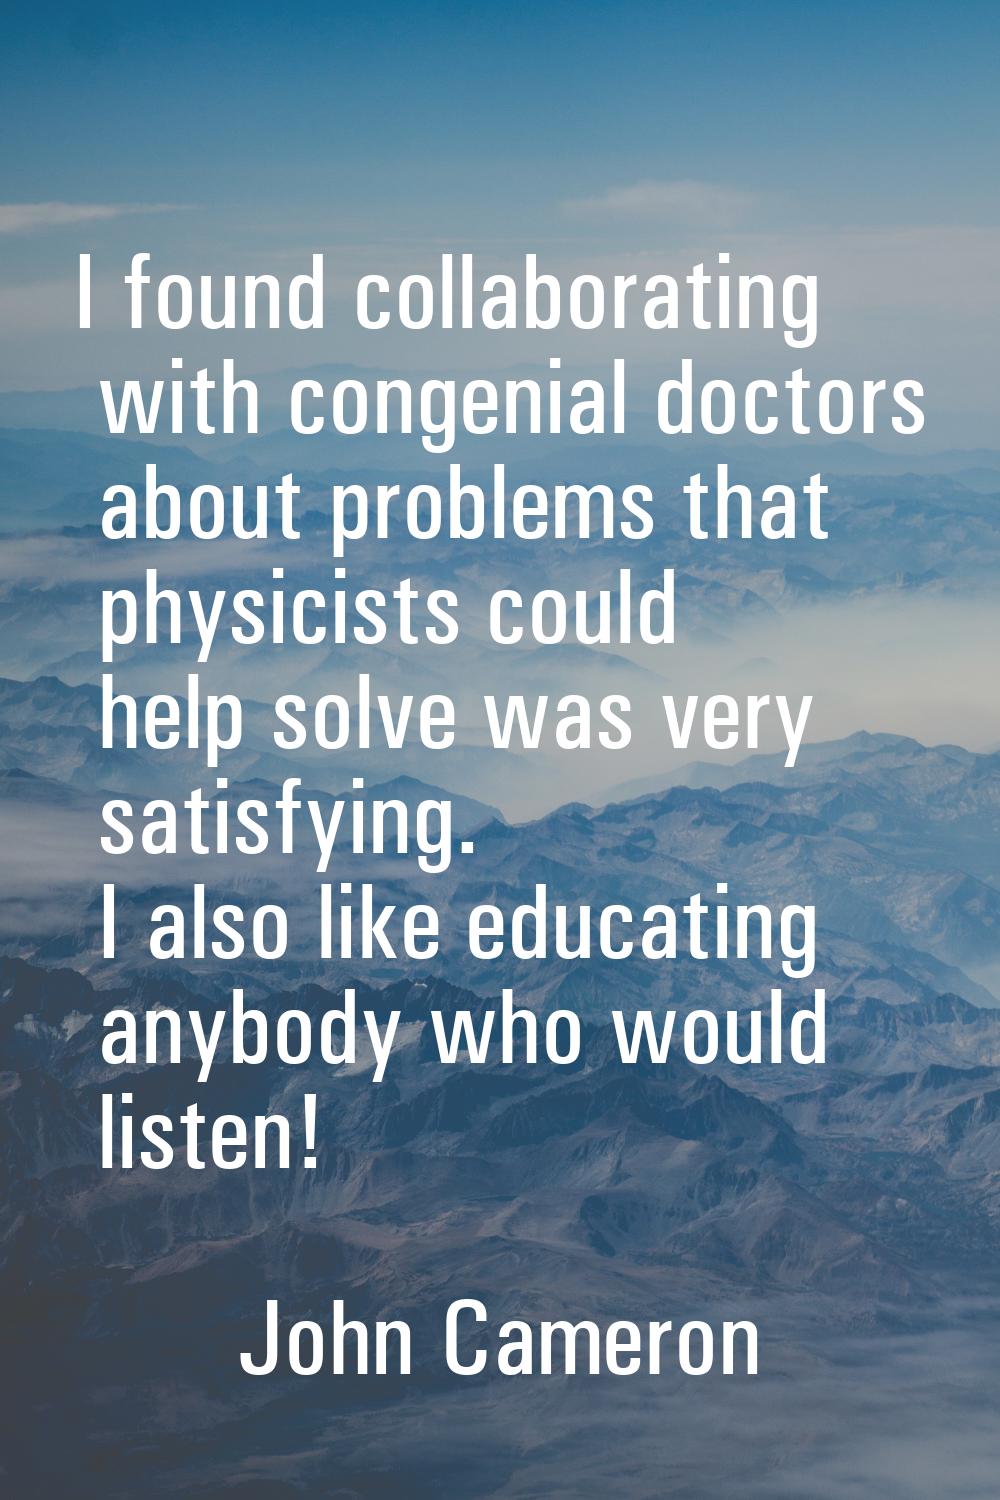 I found collaborating with congenial doctors about problems that physicists could help solve was ve